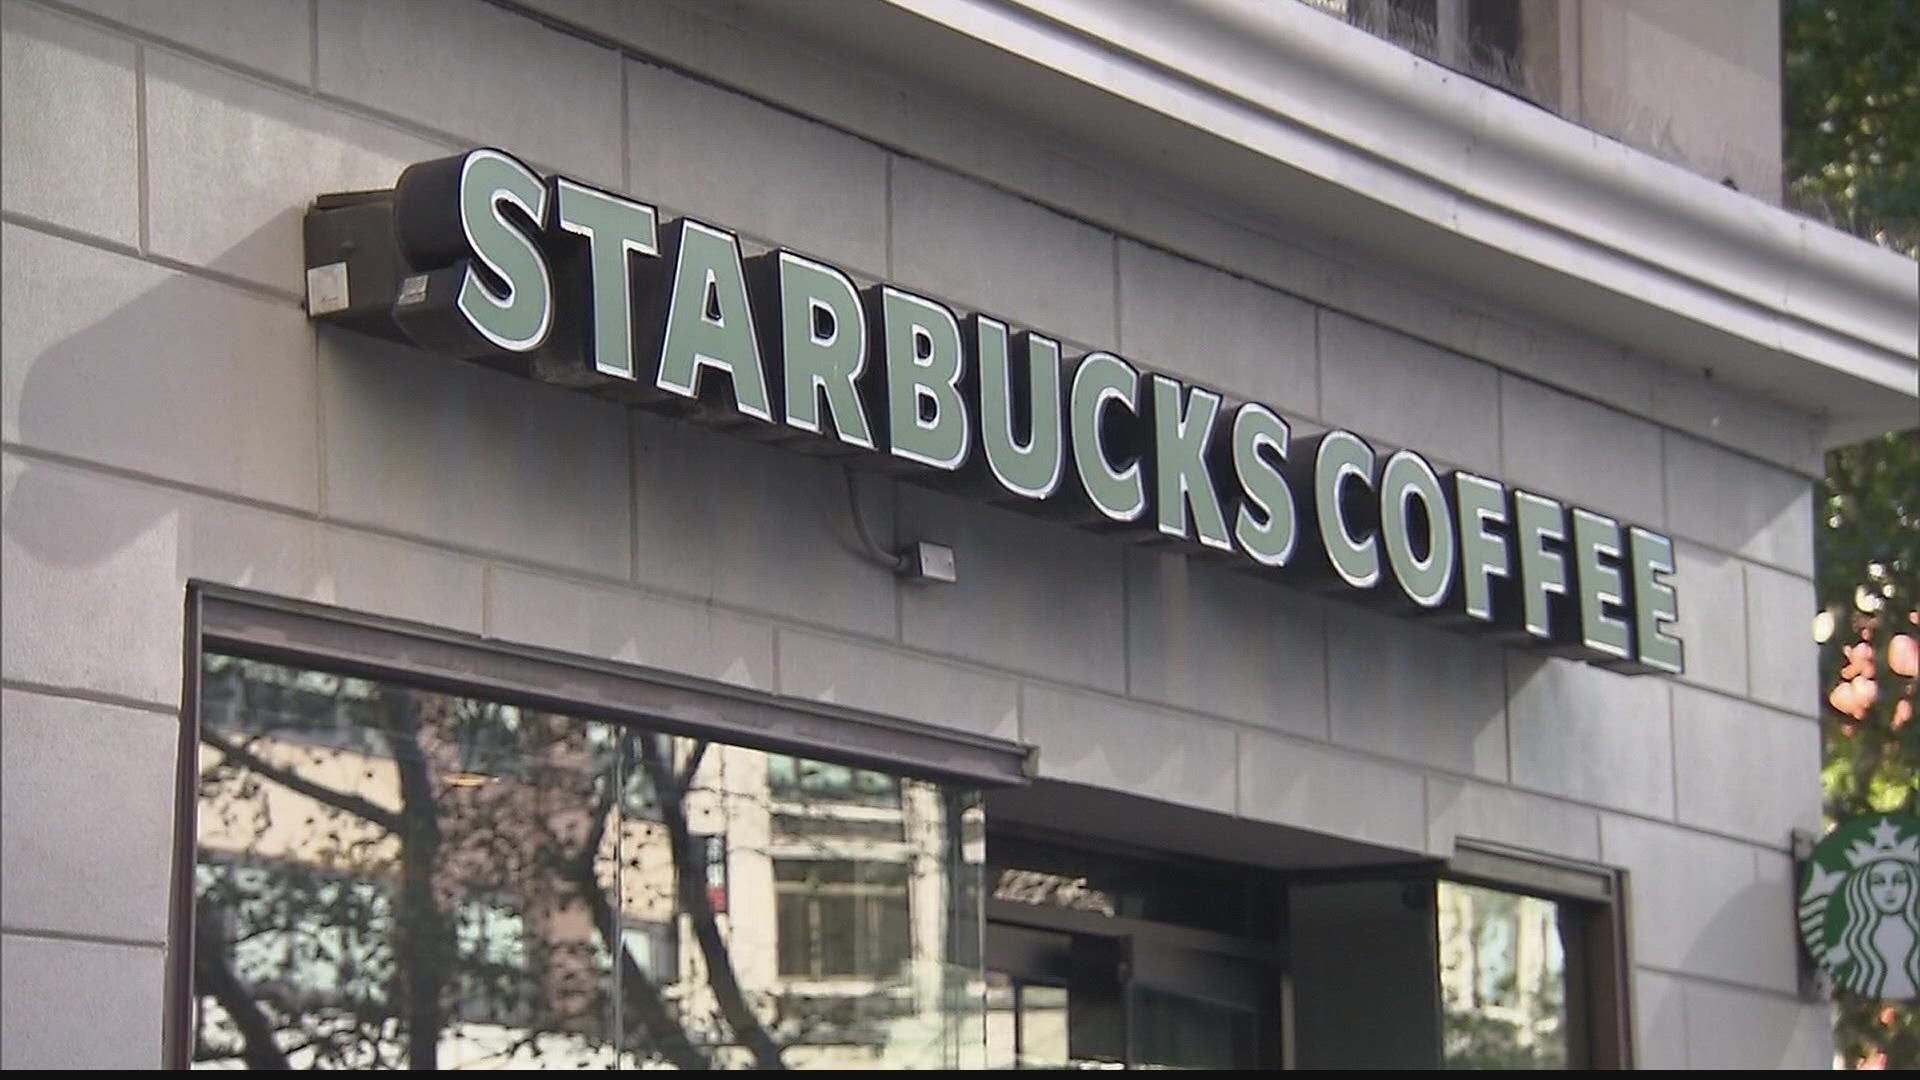 Workers at the Starbucks on Howell Mill Road became the first in the city of Atlanta to unionize, organizers said.